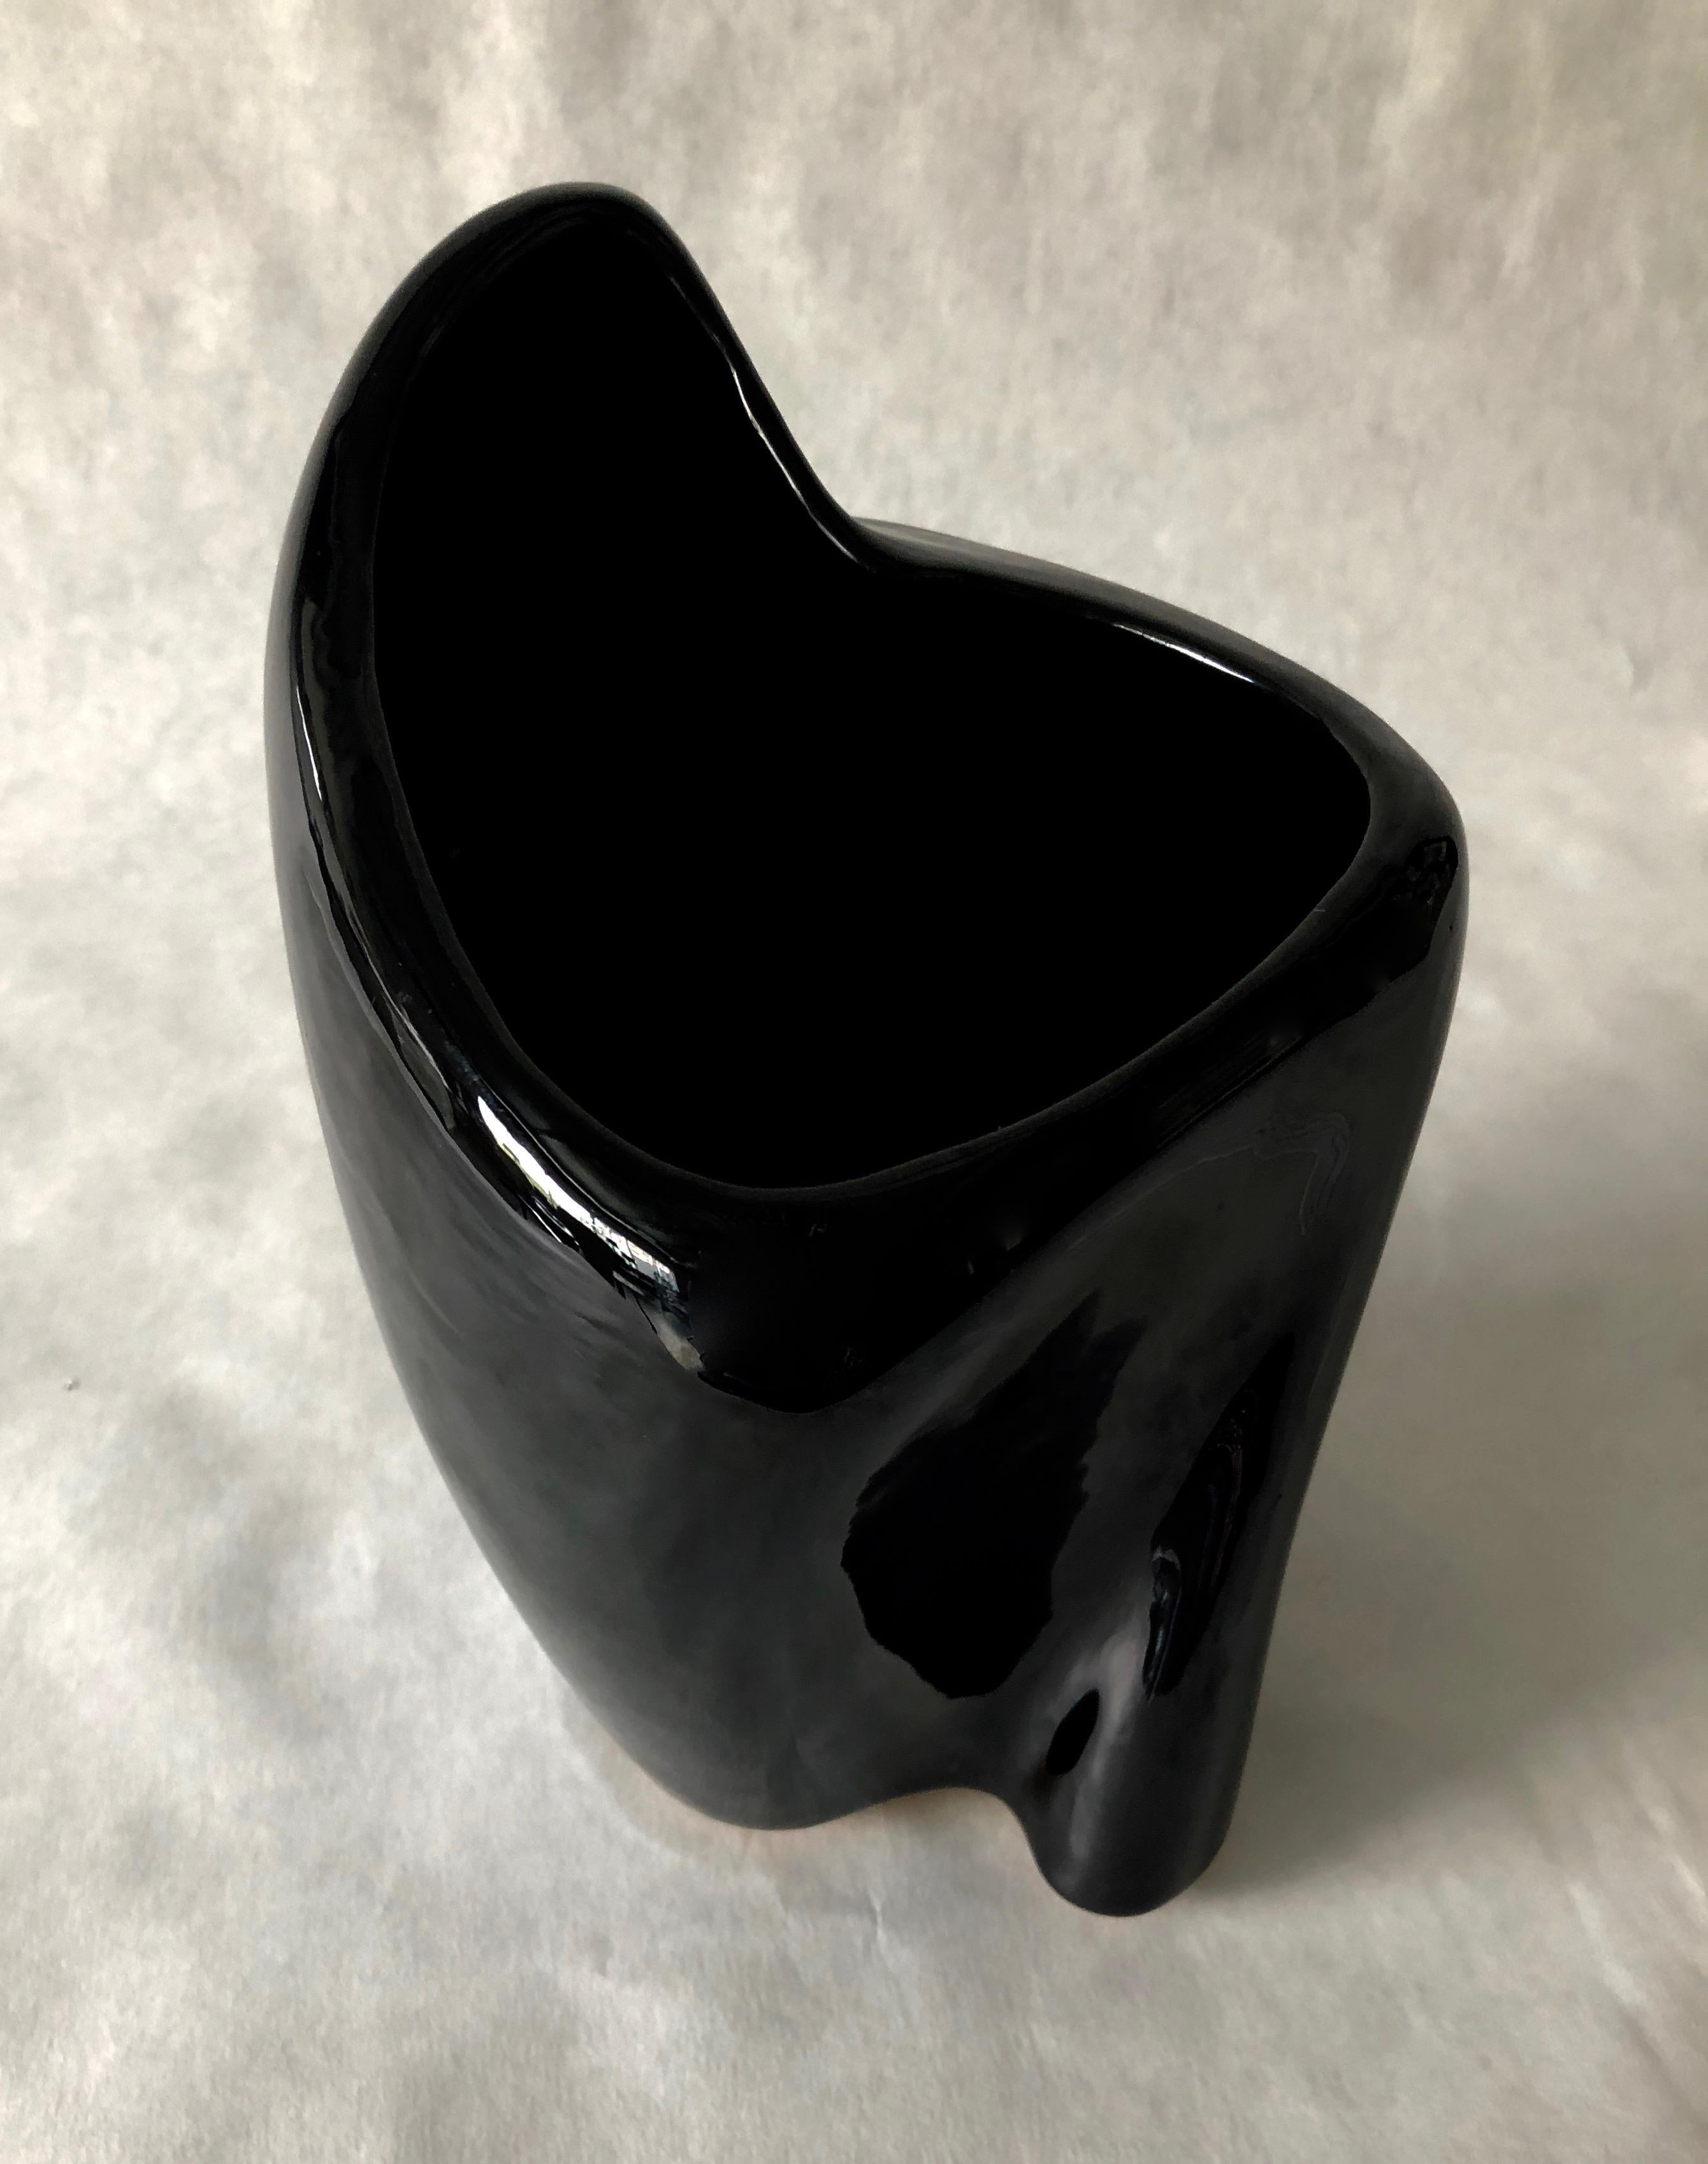 Black Glazed Pottery Organically Shaped Vase or Vessel by Frankoma In Good Condition For Sale In Houston, TX